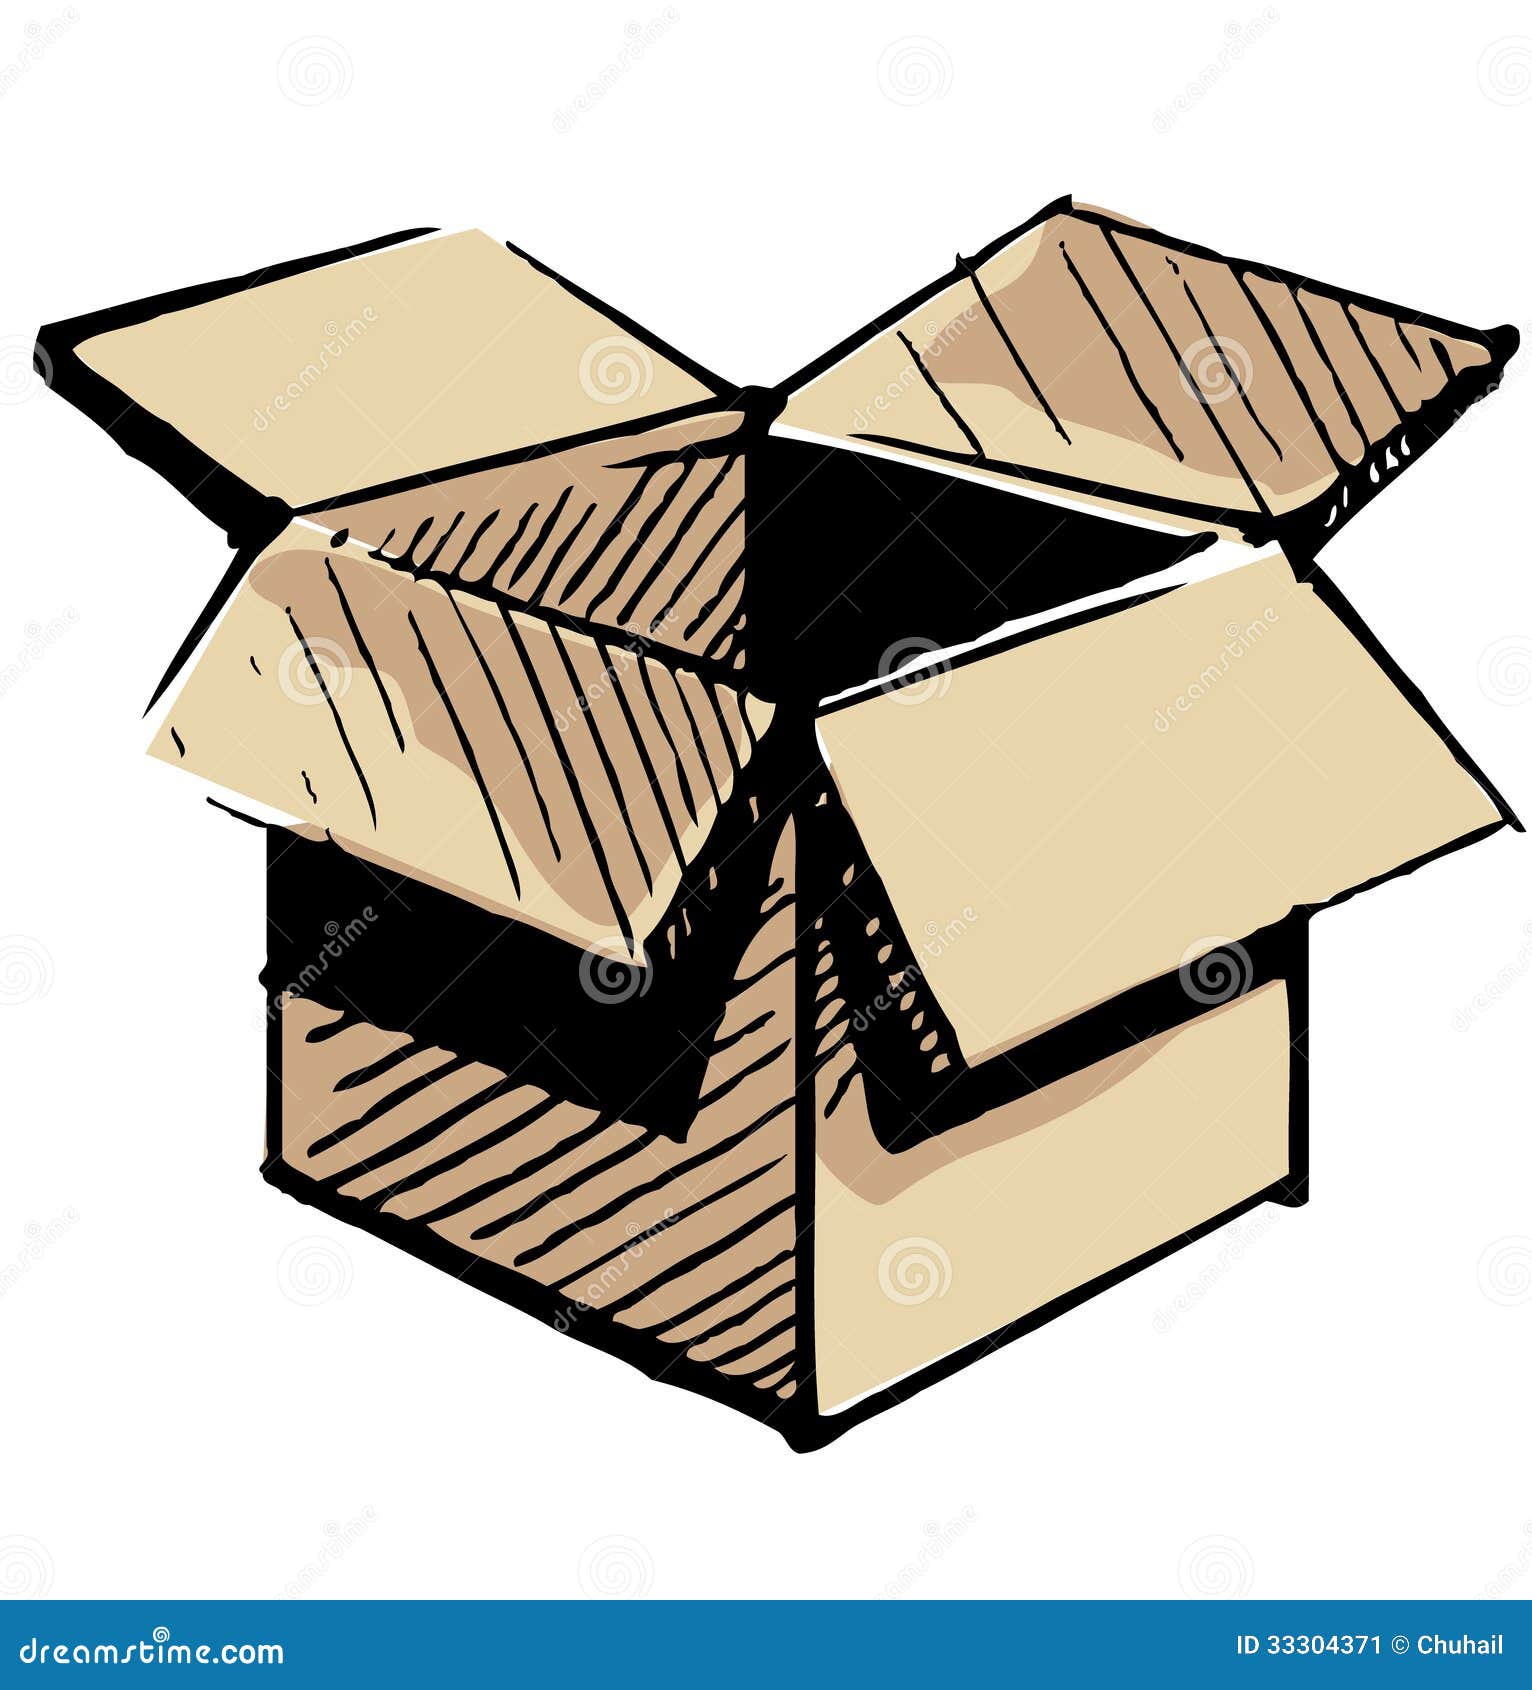 Quirky Drawing Open Box Stock Vector Royalty Free 51000874  Shutterstock